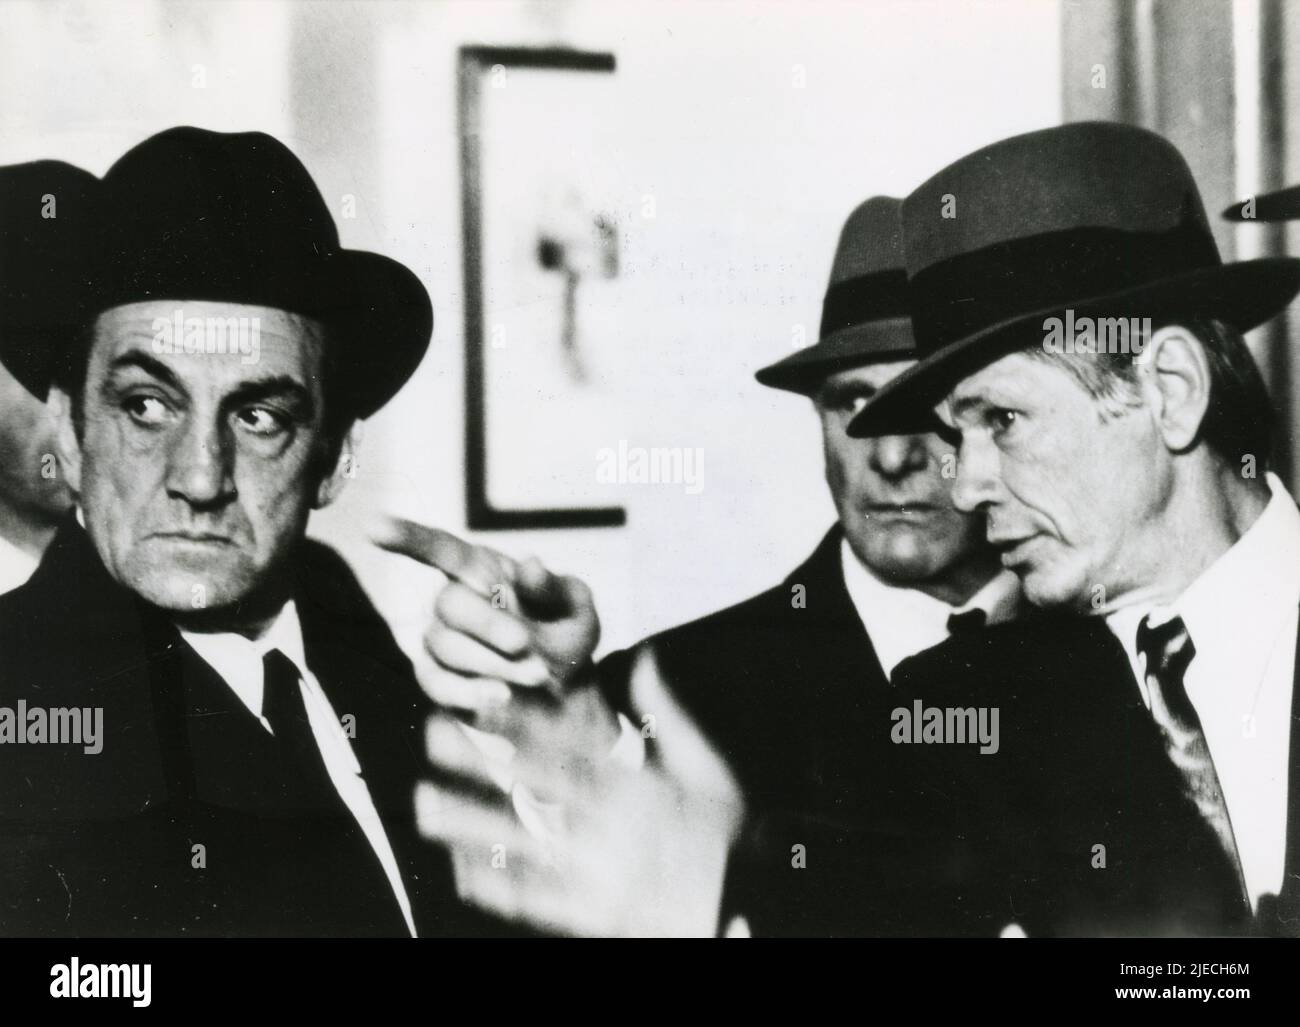 Italian actor Lino Ventura and American actor Charles Bronson in the movie The Valachi Papers, F/I 1972 Stock Photo